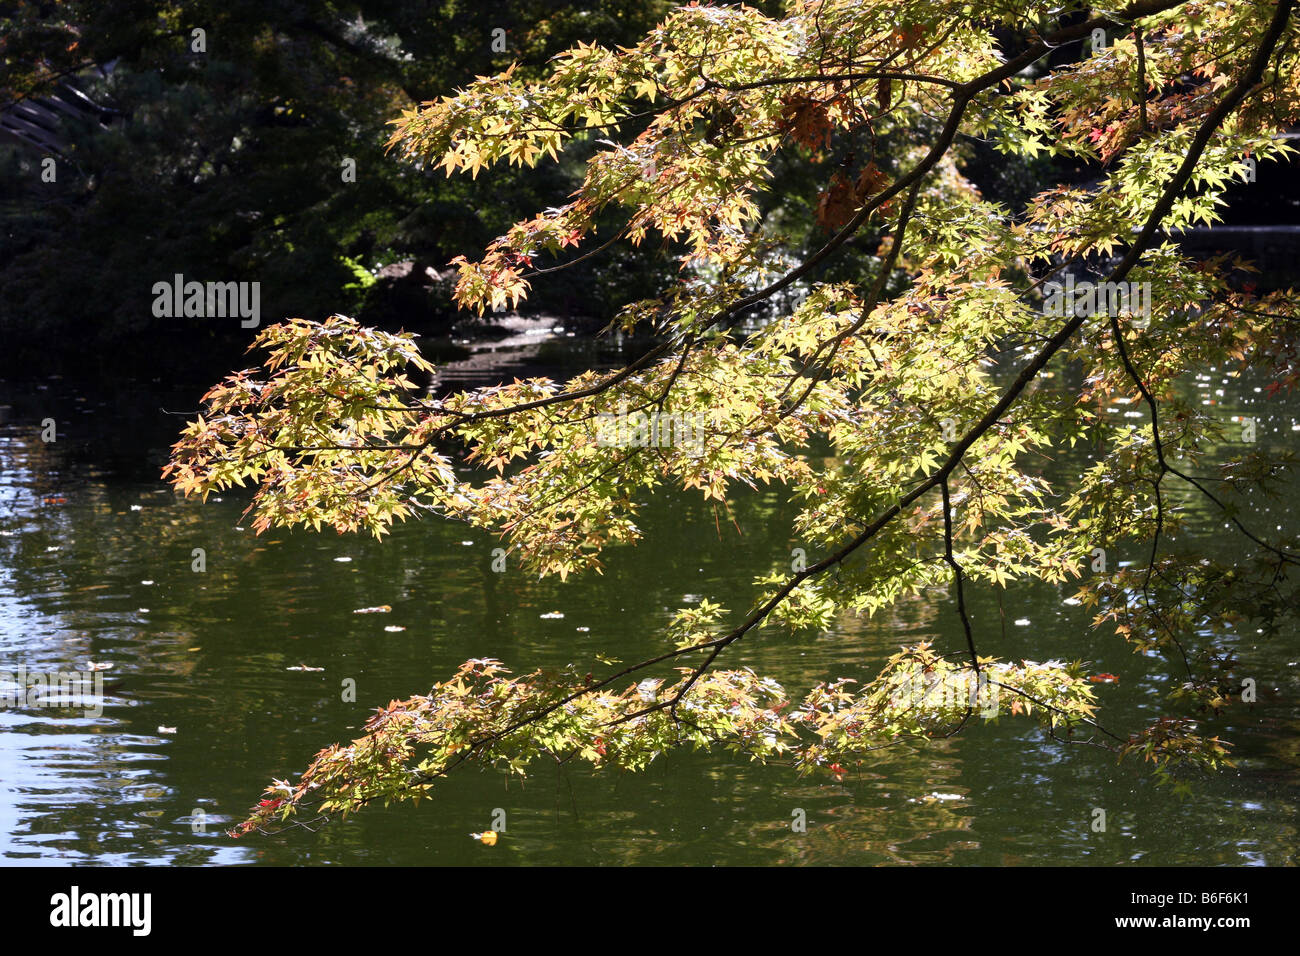 Japanese Bloodroot tree leaves leaning over a pond during the Fall season Forth Worth Texas Stock Photo